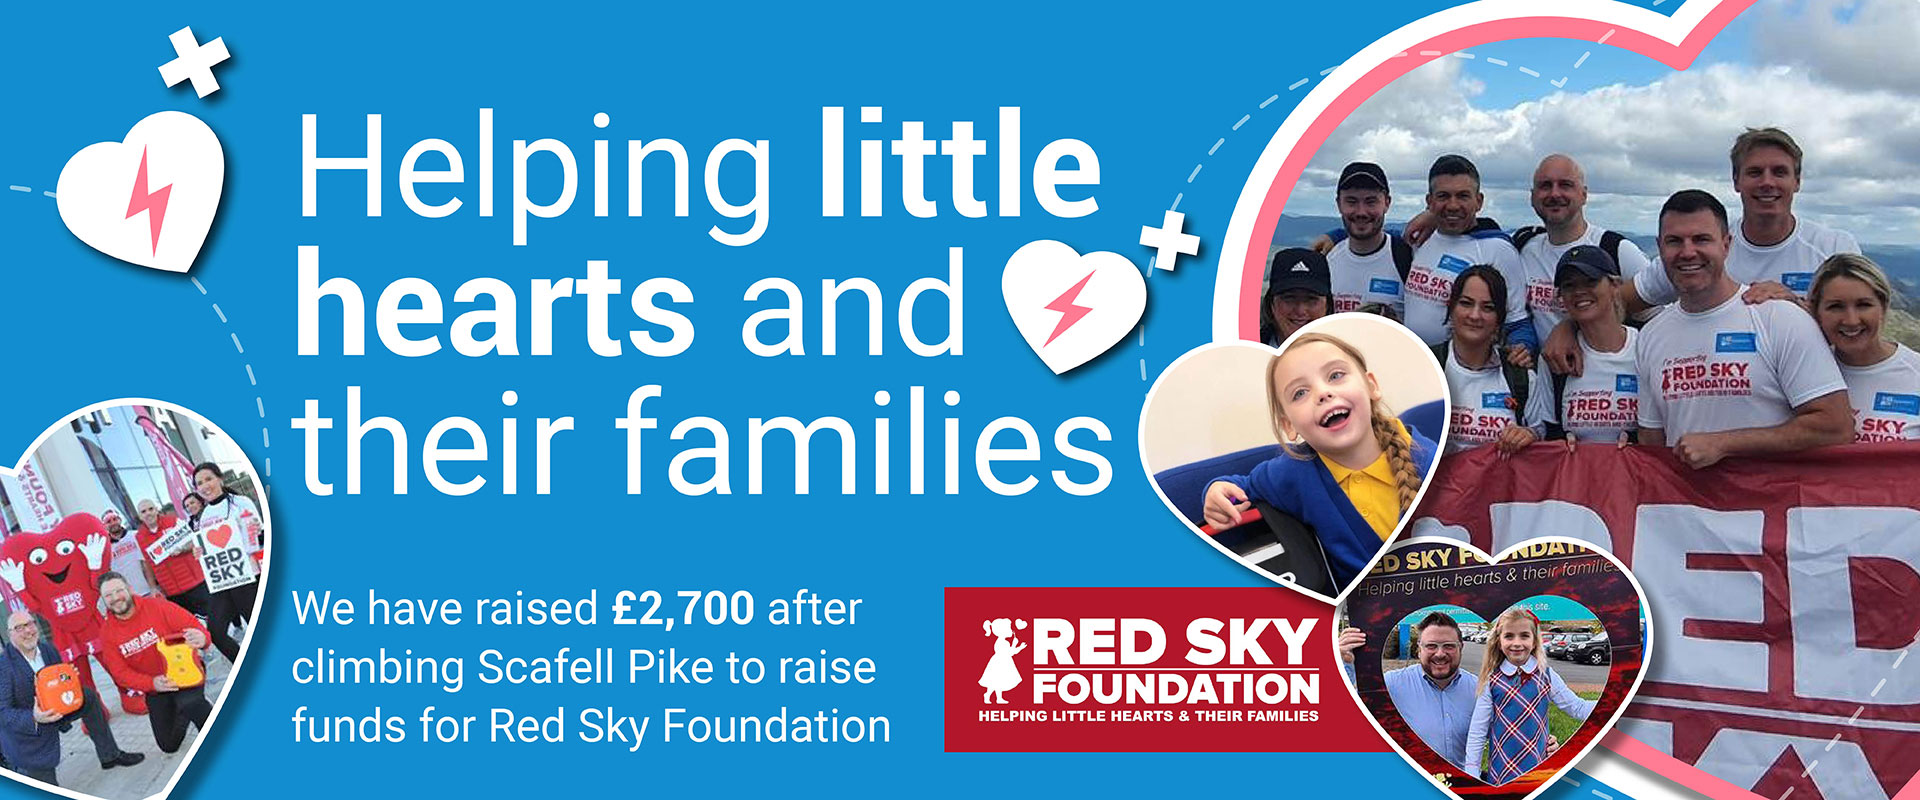 Red Sky Foundation banner